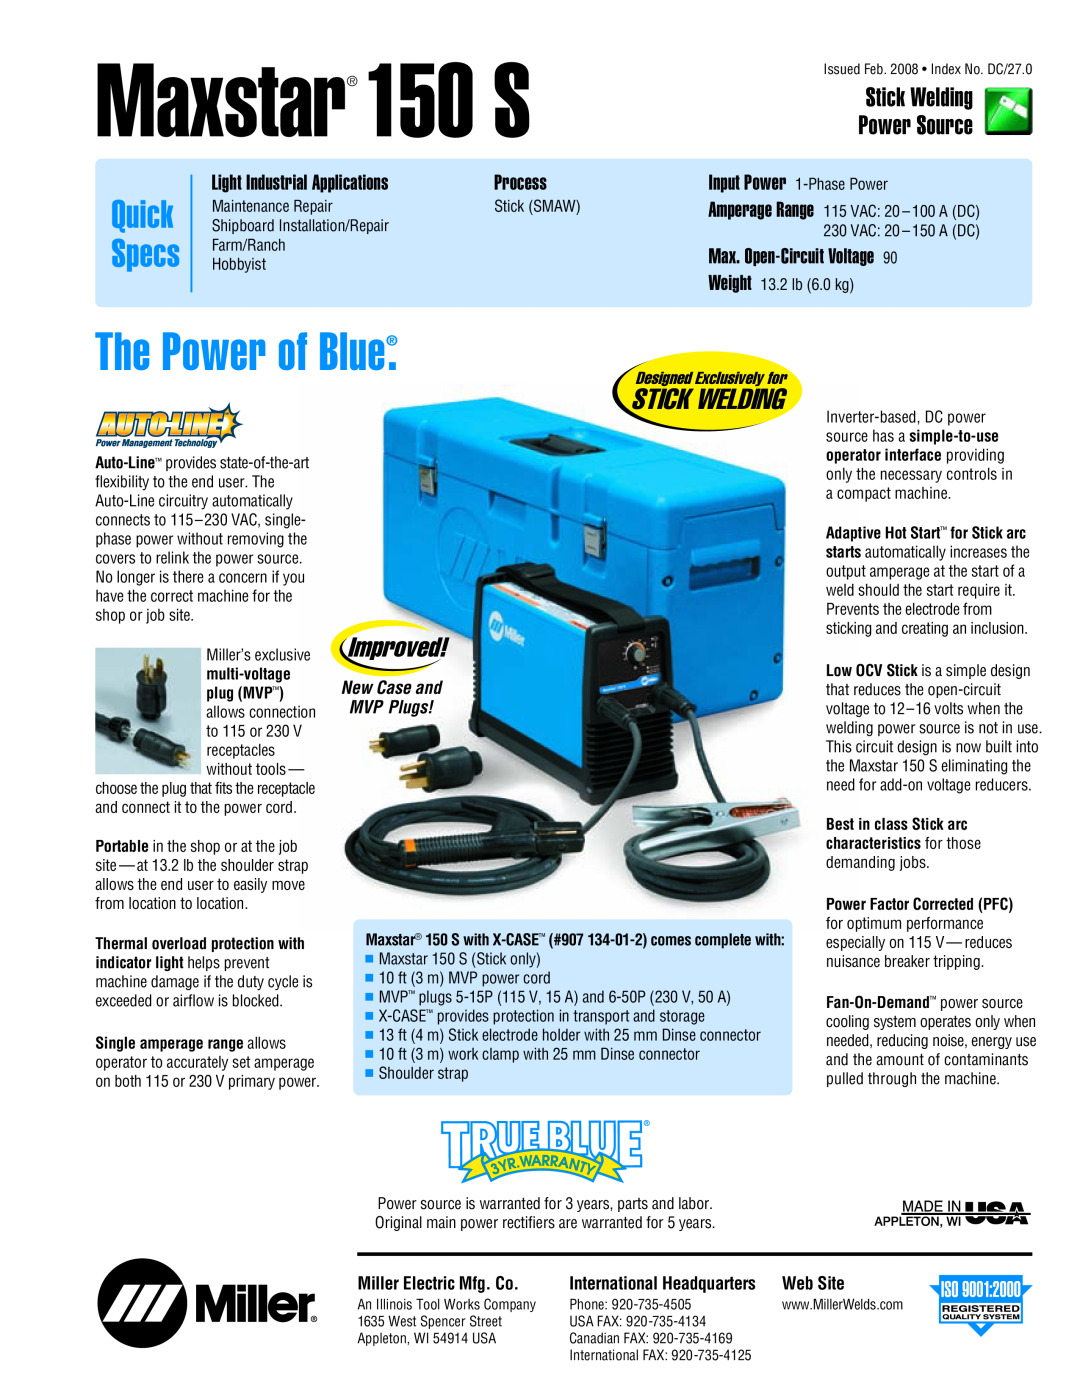 Miller Electric manual Maxstar 150 S, The Power of Blue, Quick, Stick Welding, Specs, Power Source, Improved, Process 